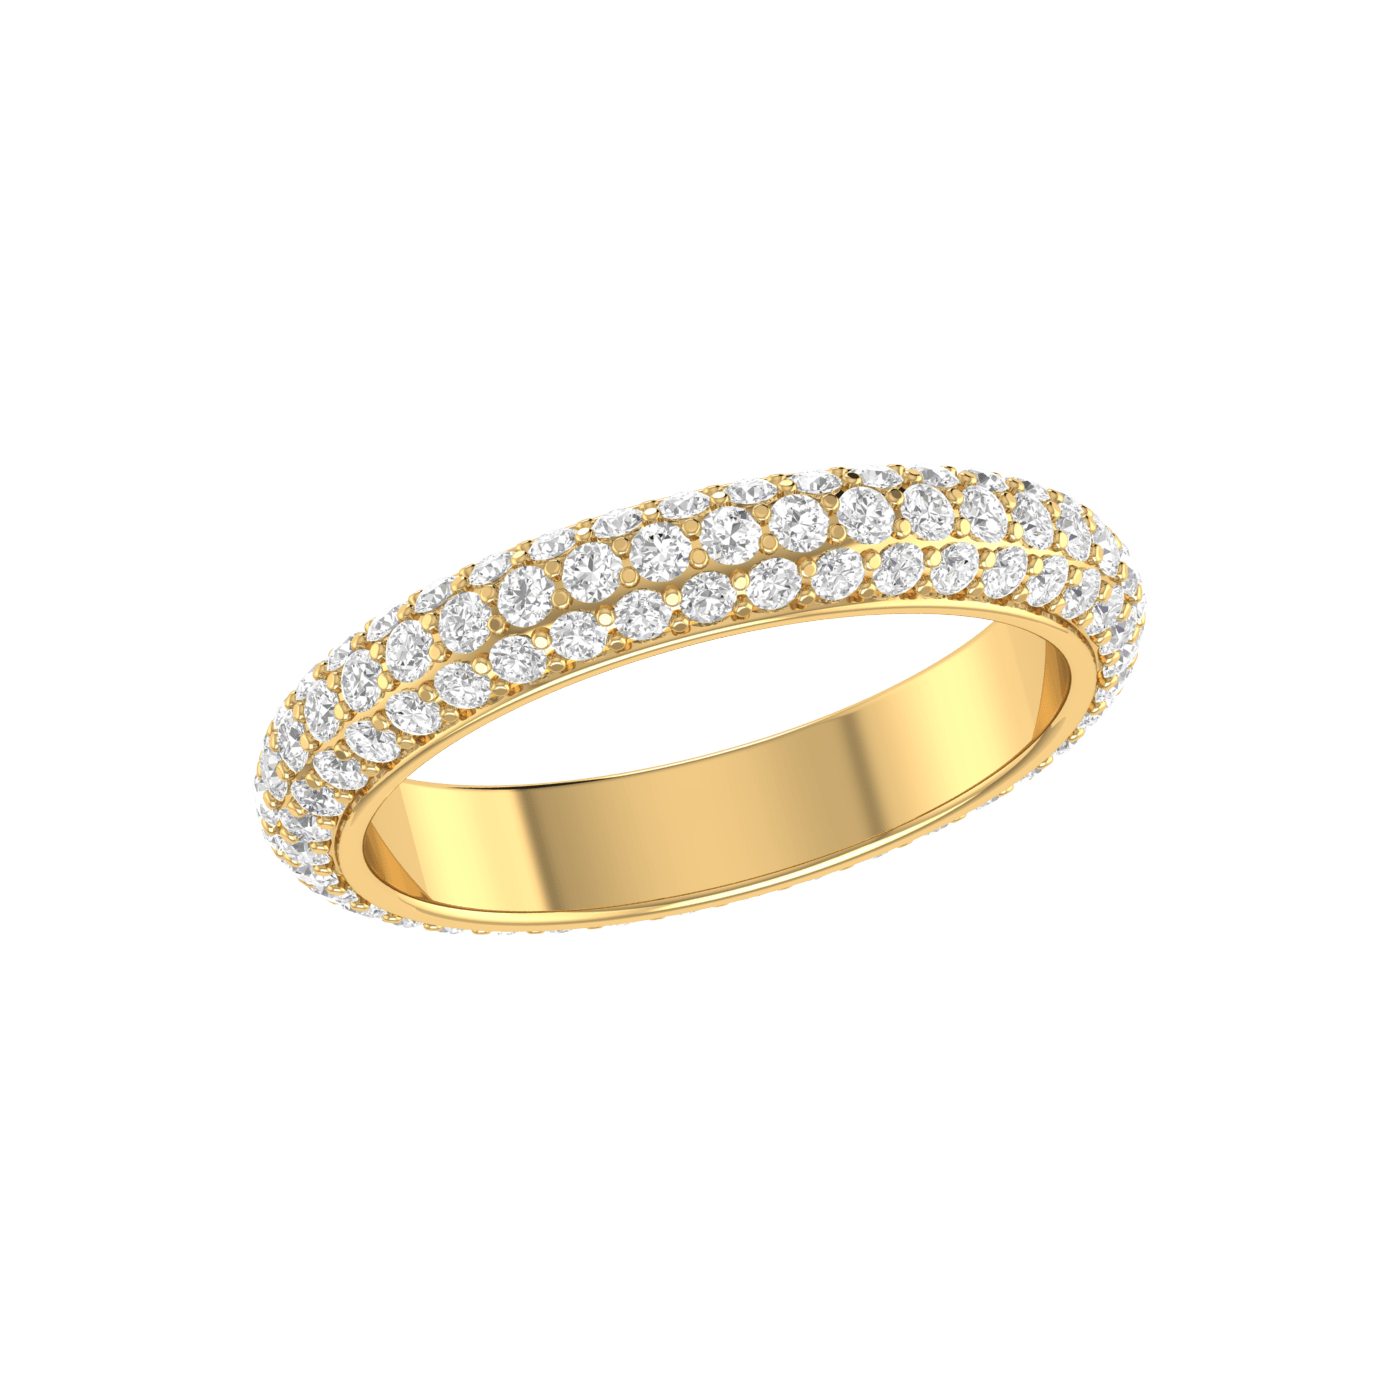 Diamond Link Purity Ring in 14K Gold #1073